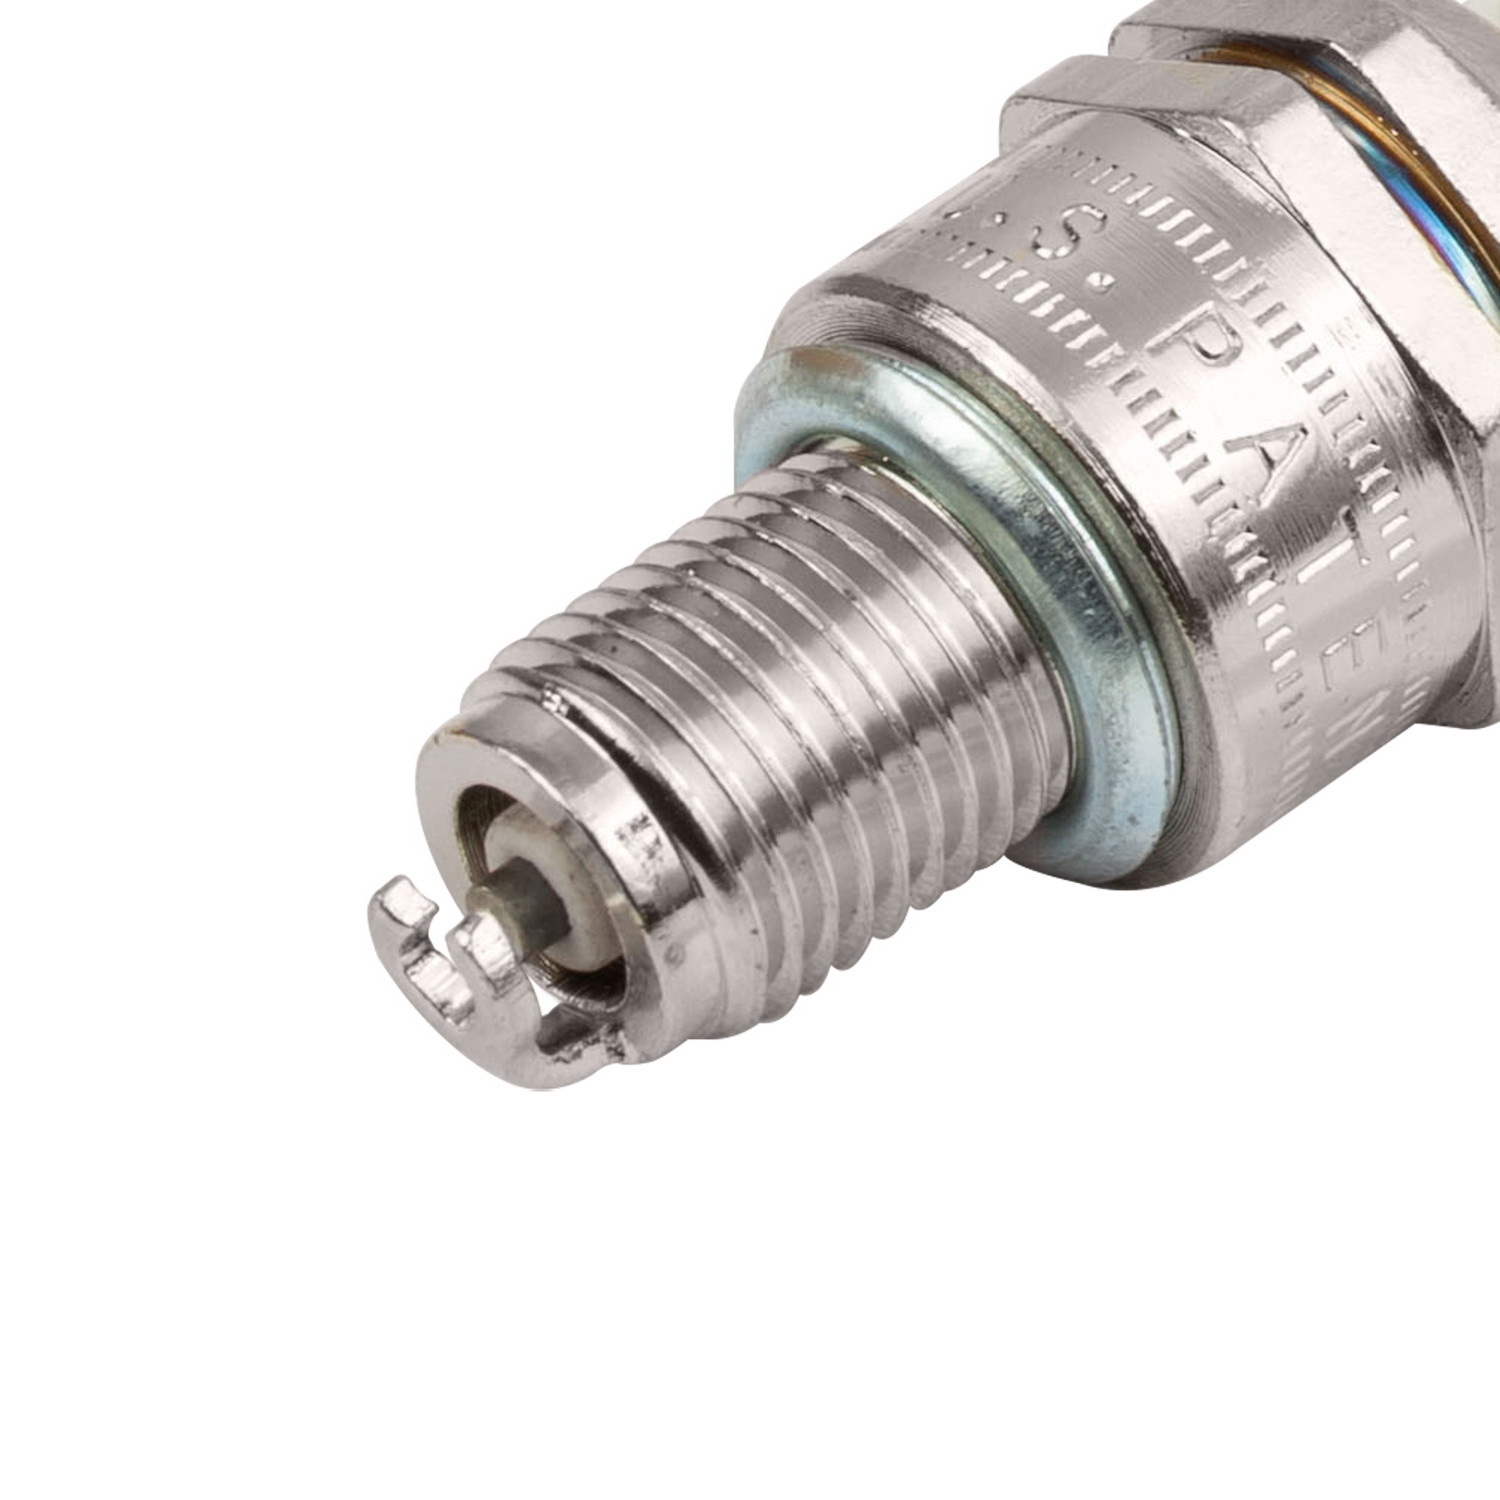 E3 E3.24 Spark Plug, 10 mm Thread, 5/8 in Hex, For: 2-Cycle, 4-Cycle Engines - 2